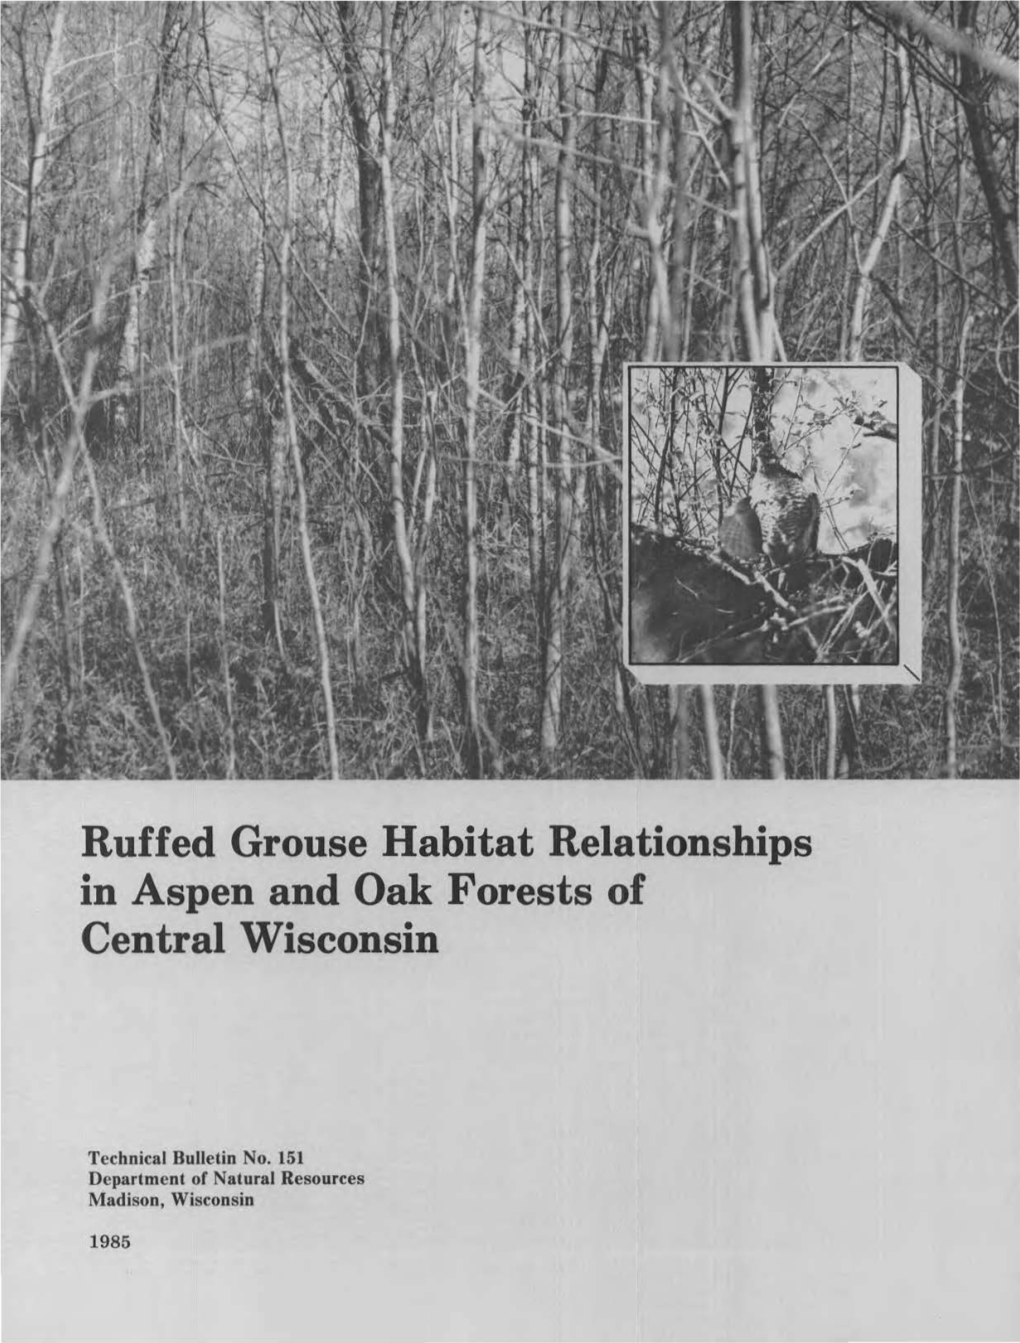 Ruffed Grouse Habitat Relationships in Aspen and Oak Forests of Central Wisconsin